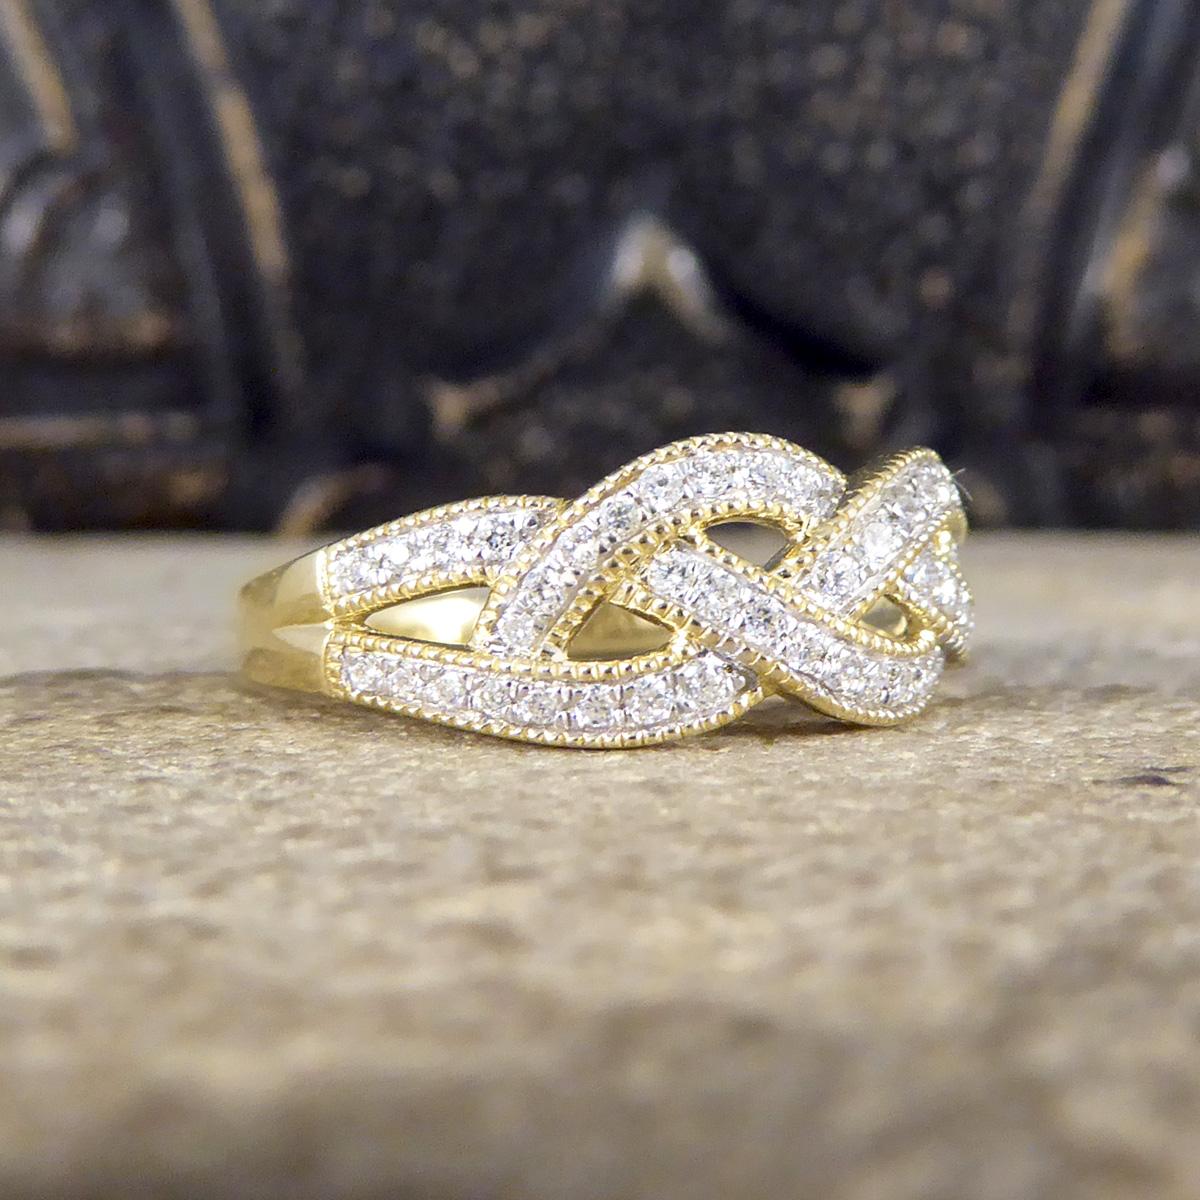 This gorgeous plait ring features 49 Modern Brilliant Cut Diamonds all of equal size set in a channel with detailing formed to look like a Diamond set plait. The Diamonds are clear and bright with the plait weave spreading the full head of the ring